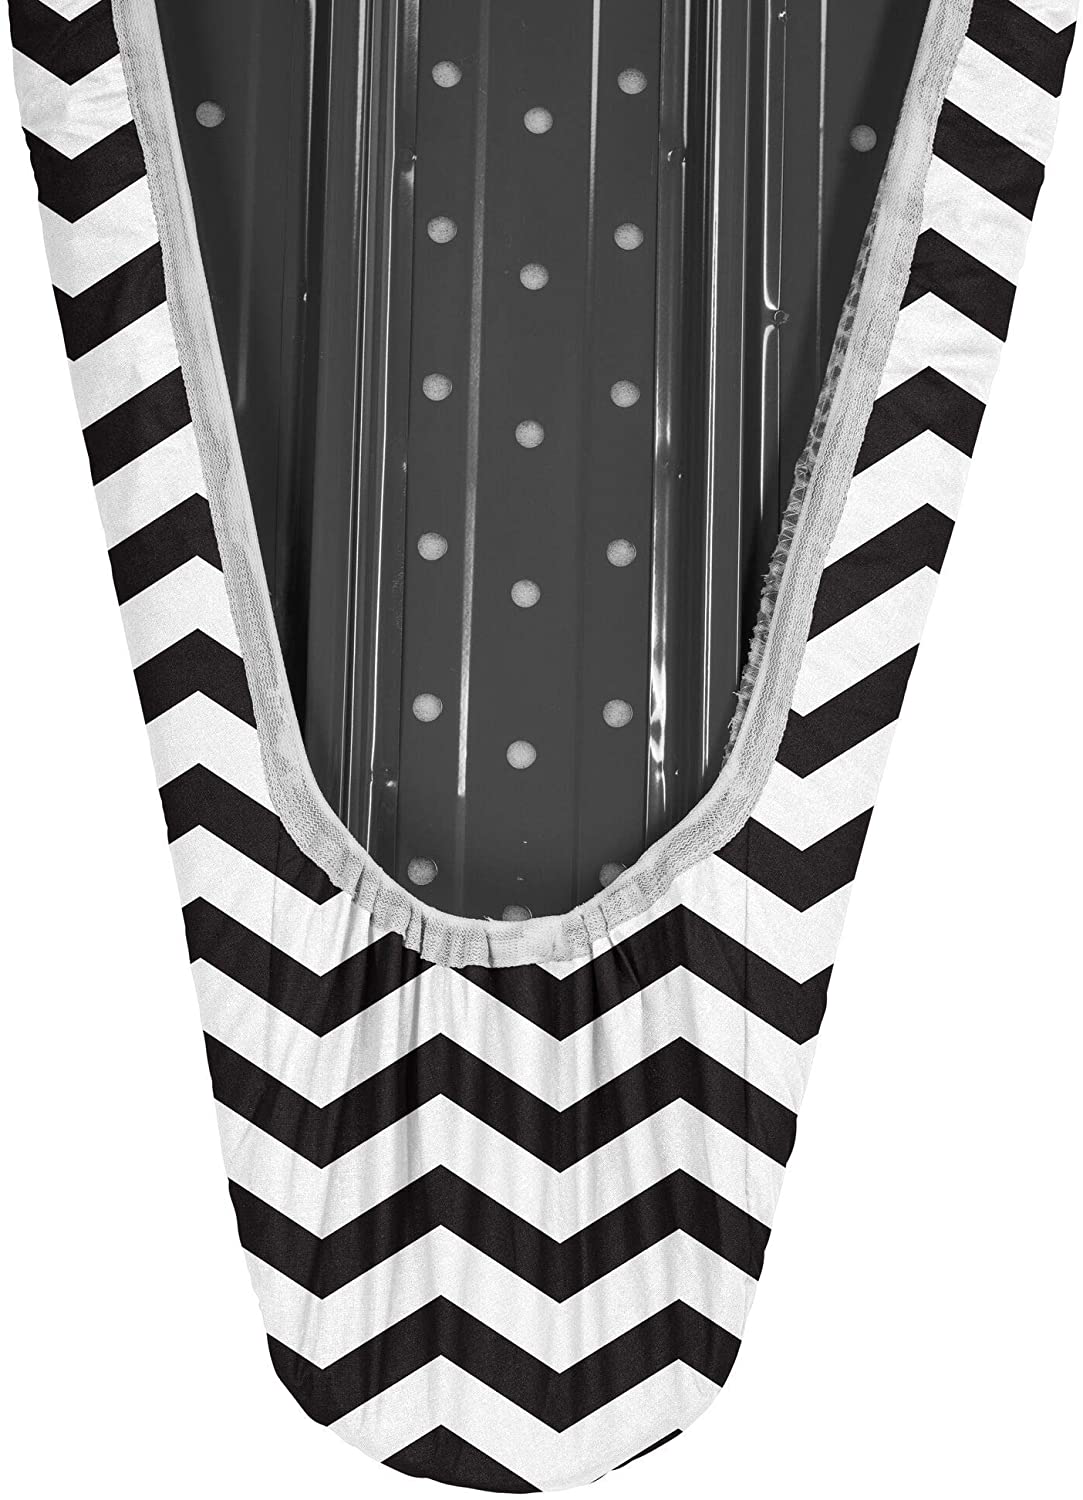 Epica Silicone Coated Ironing Board Cover- Resists Scorching and Staining - 15" x54 (Grey Chevron)